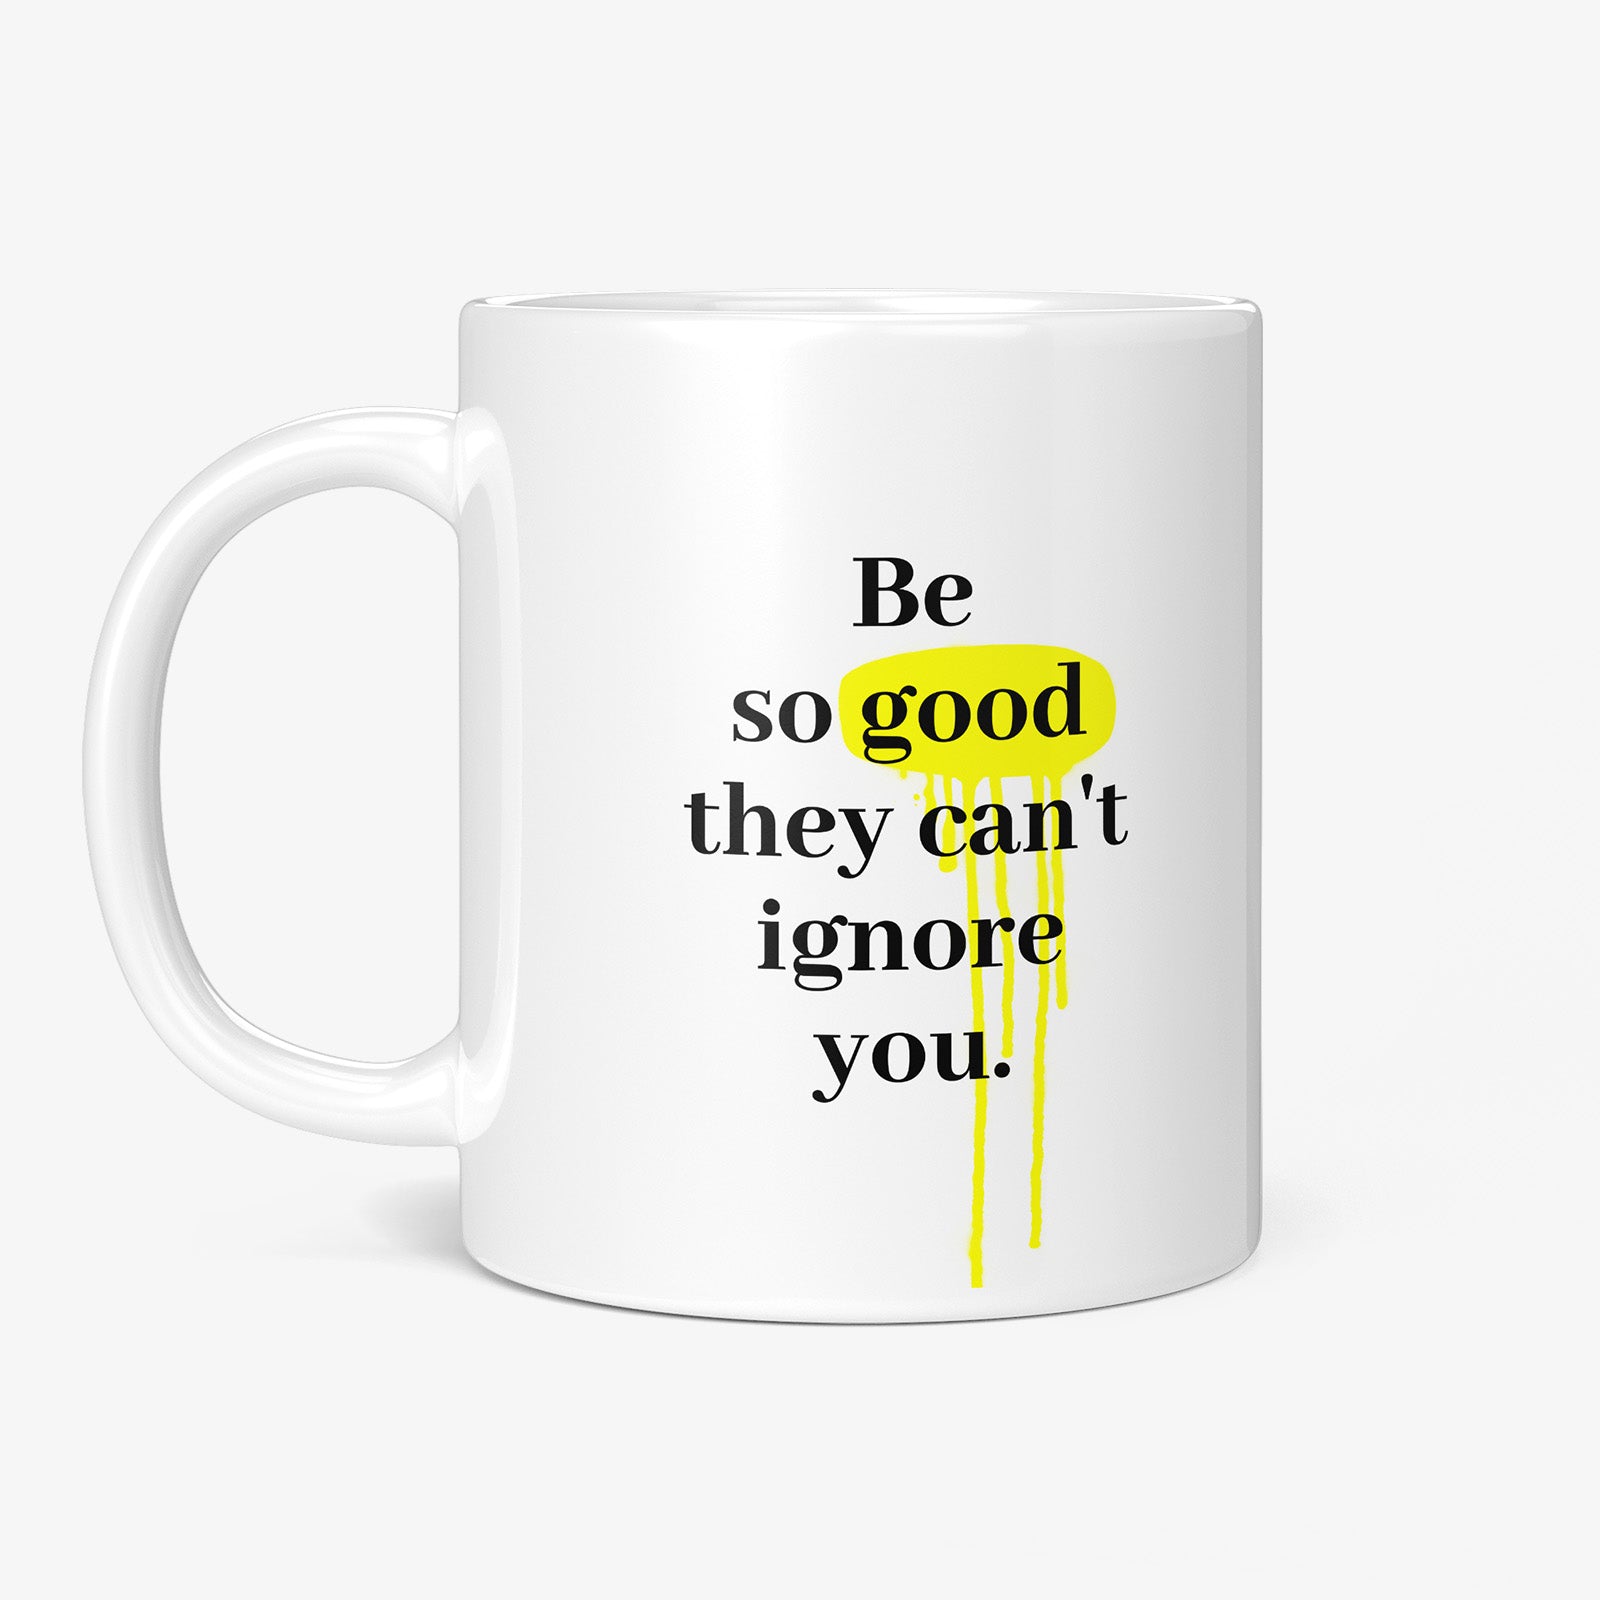 Be inspired by Steve Martin's famous quote, "Be so good they can't ignore you" on this white and glossy 11oz coffee mug with the handle on the left.